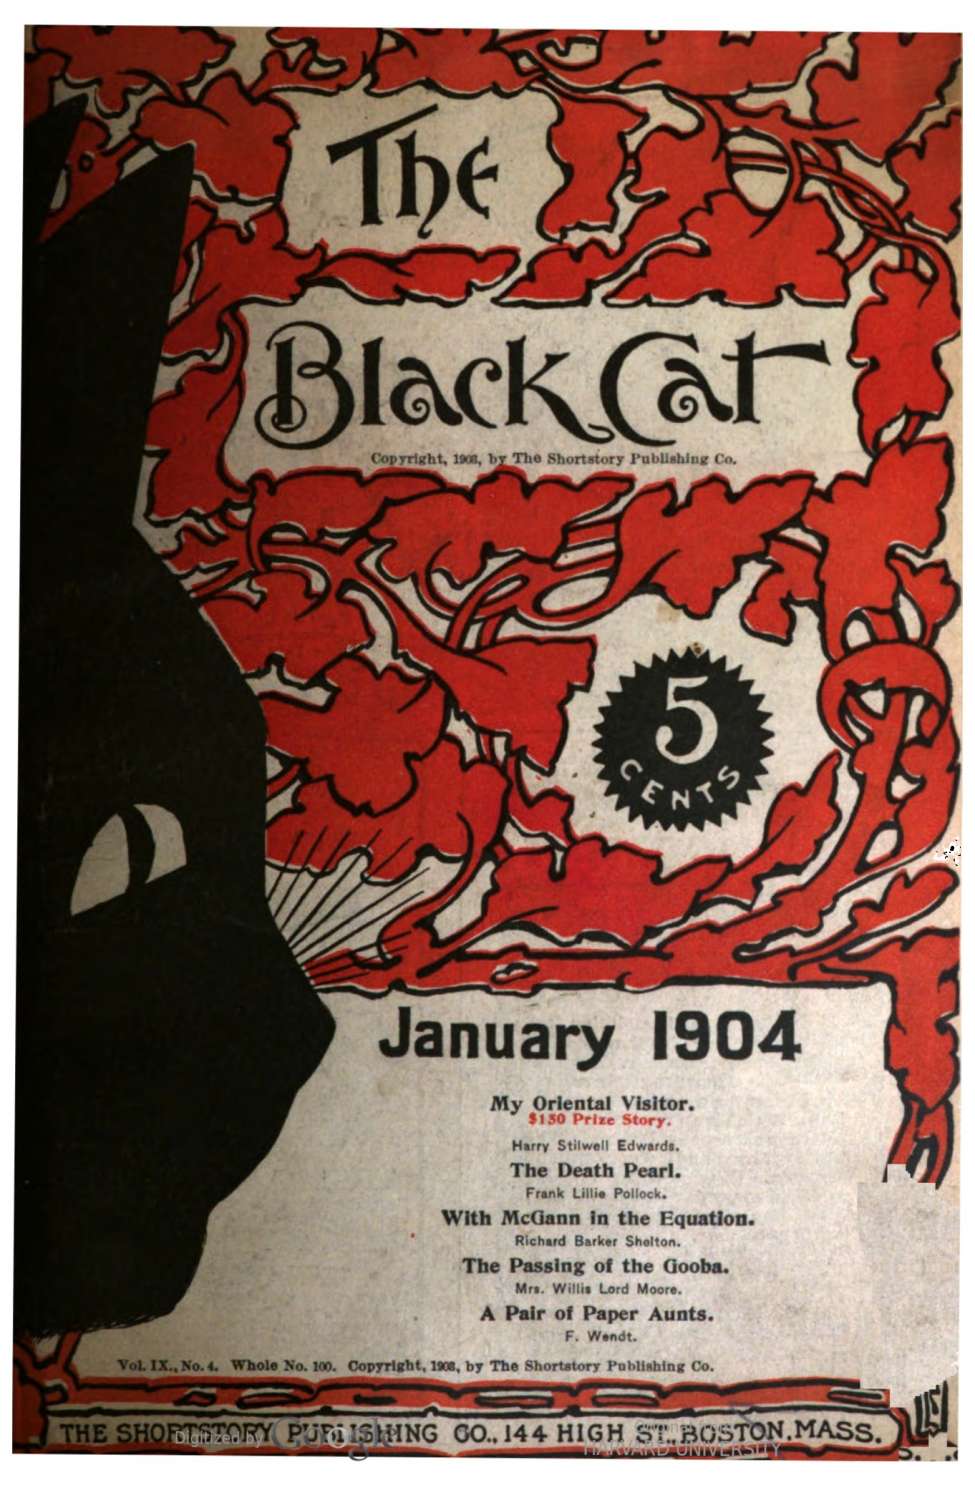 Book Cover For The Black Cat v9 4 - My Oriental Visitor - Harry Stillwell Edwards